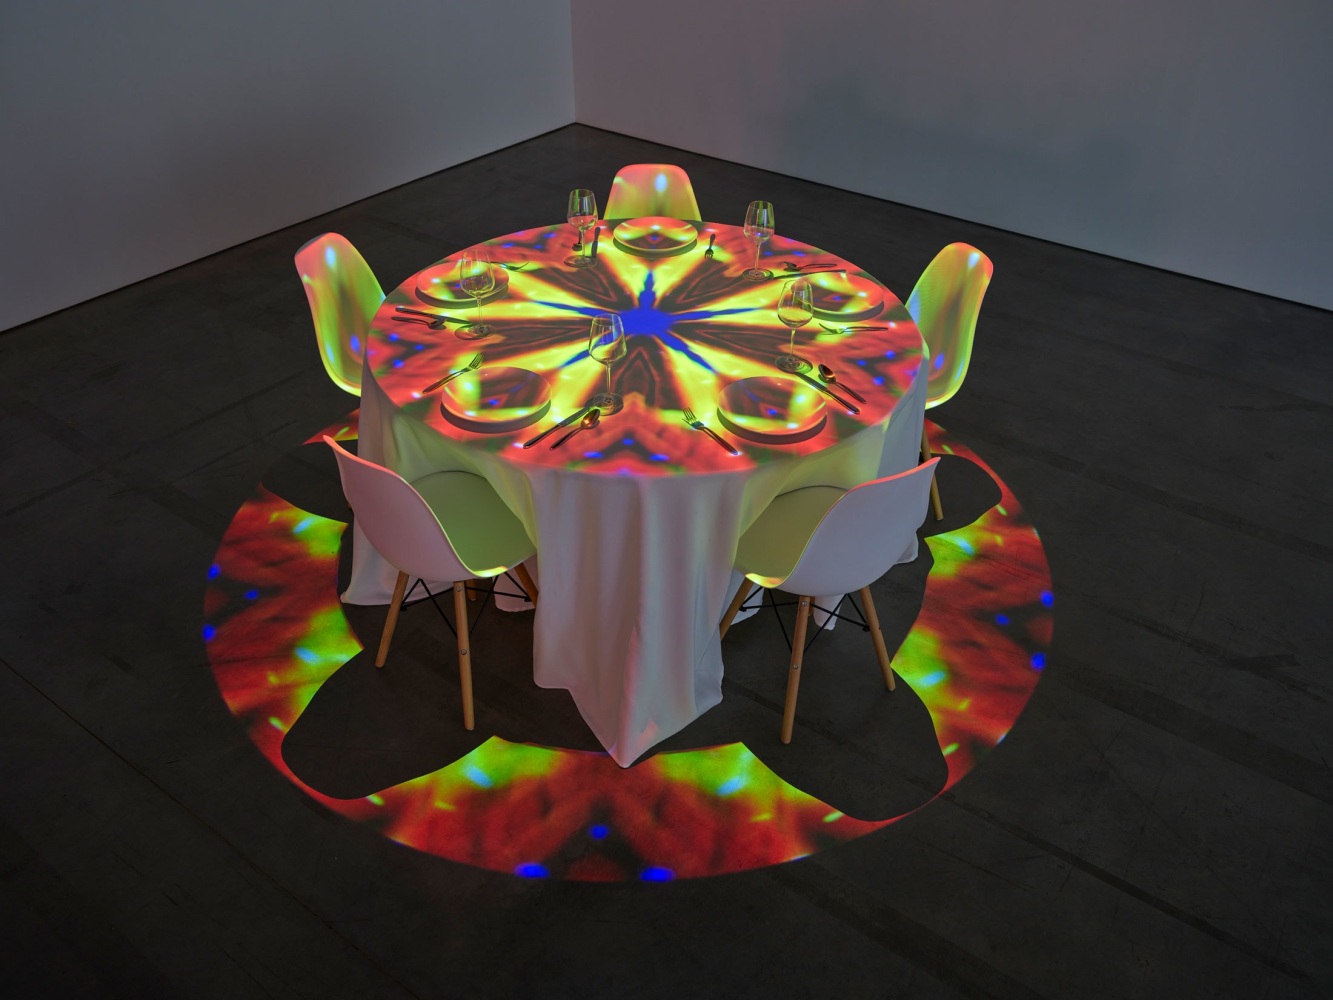 Pipilotti Rist
Streichelnder Nachtmahl Kreis 25 Knickerbocker Ave (Caressing Dinner Circle 25 Knickerbocker Ave), 2020
Video Installation for a round table, silent
Dimensions variable
From the&amp;nbsp;Caressing Dinner Circle Family